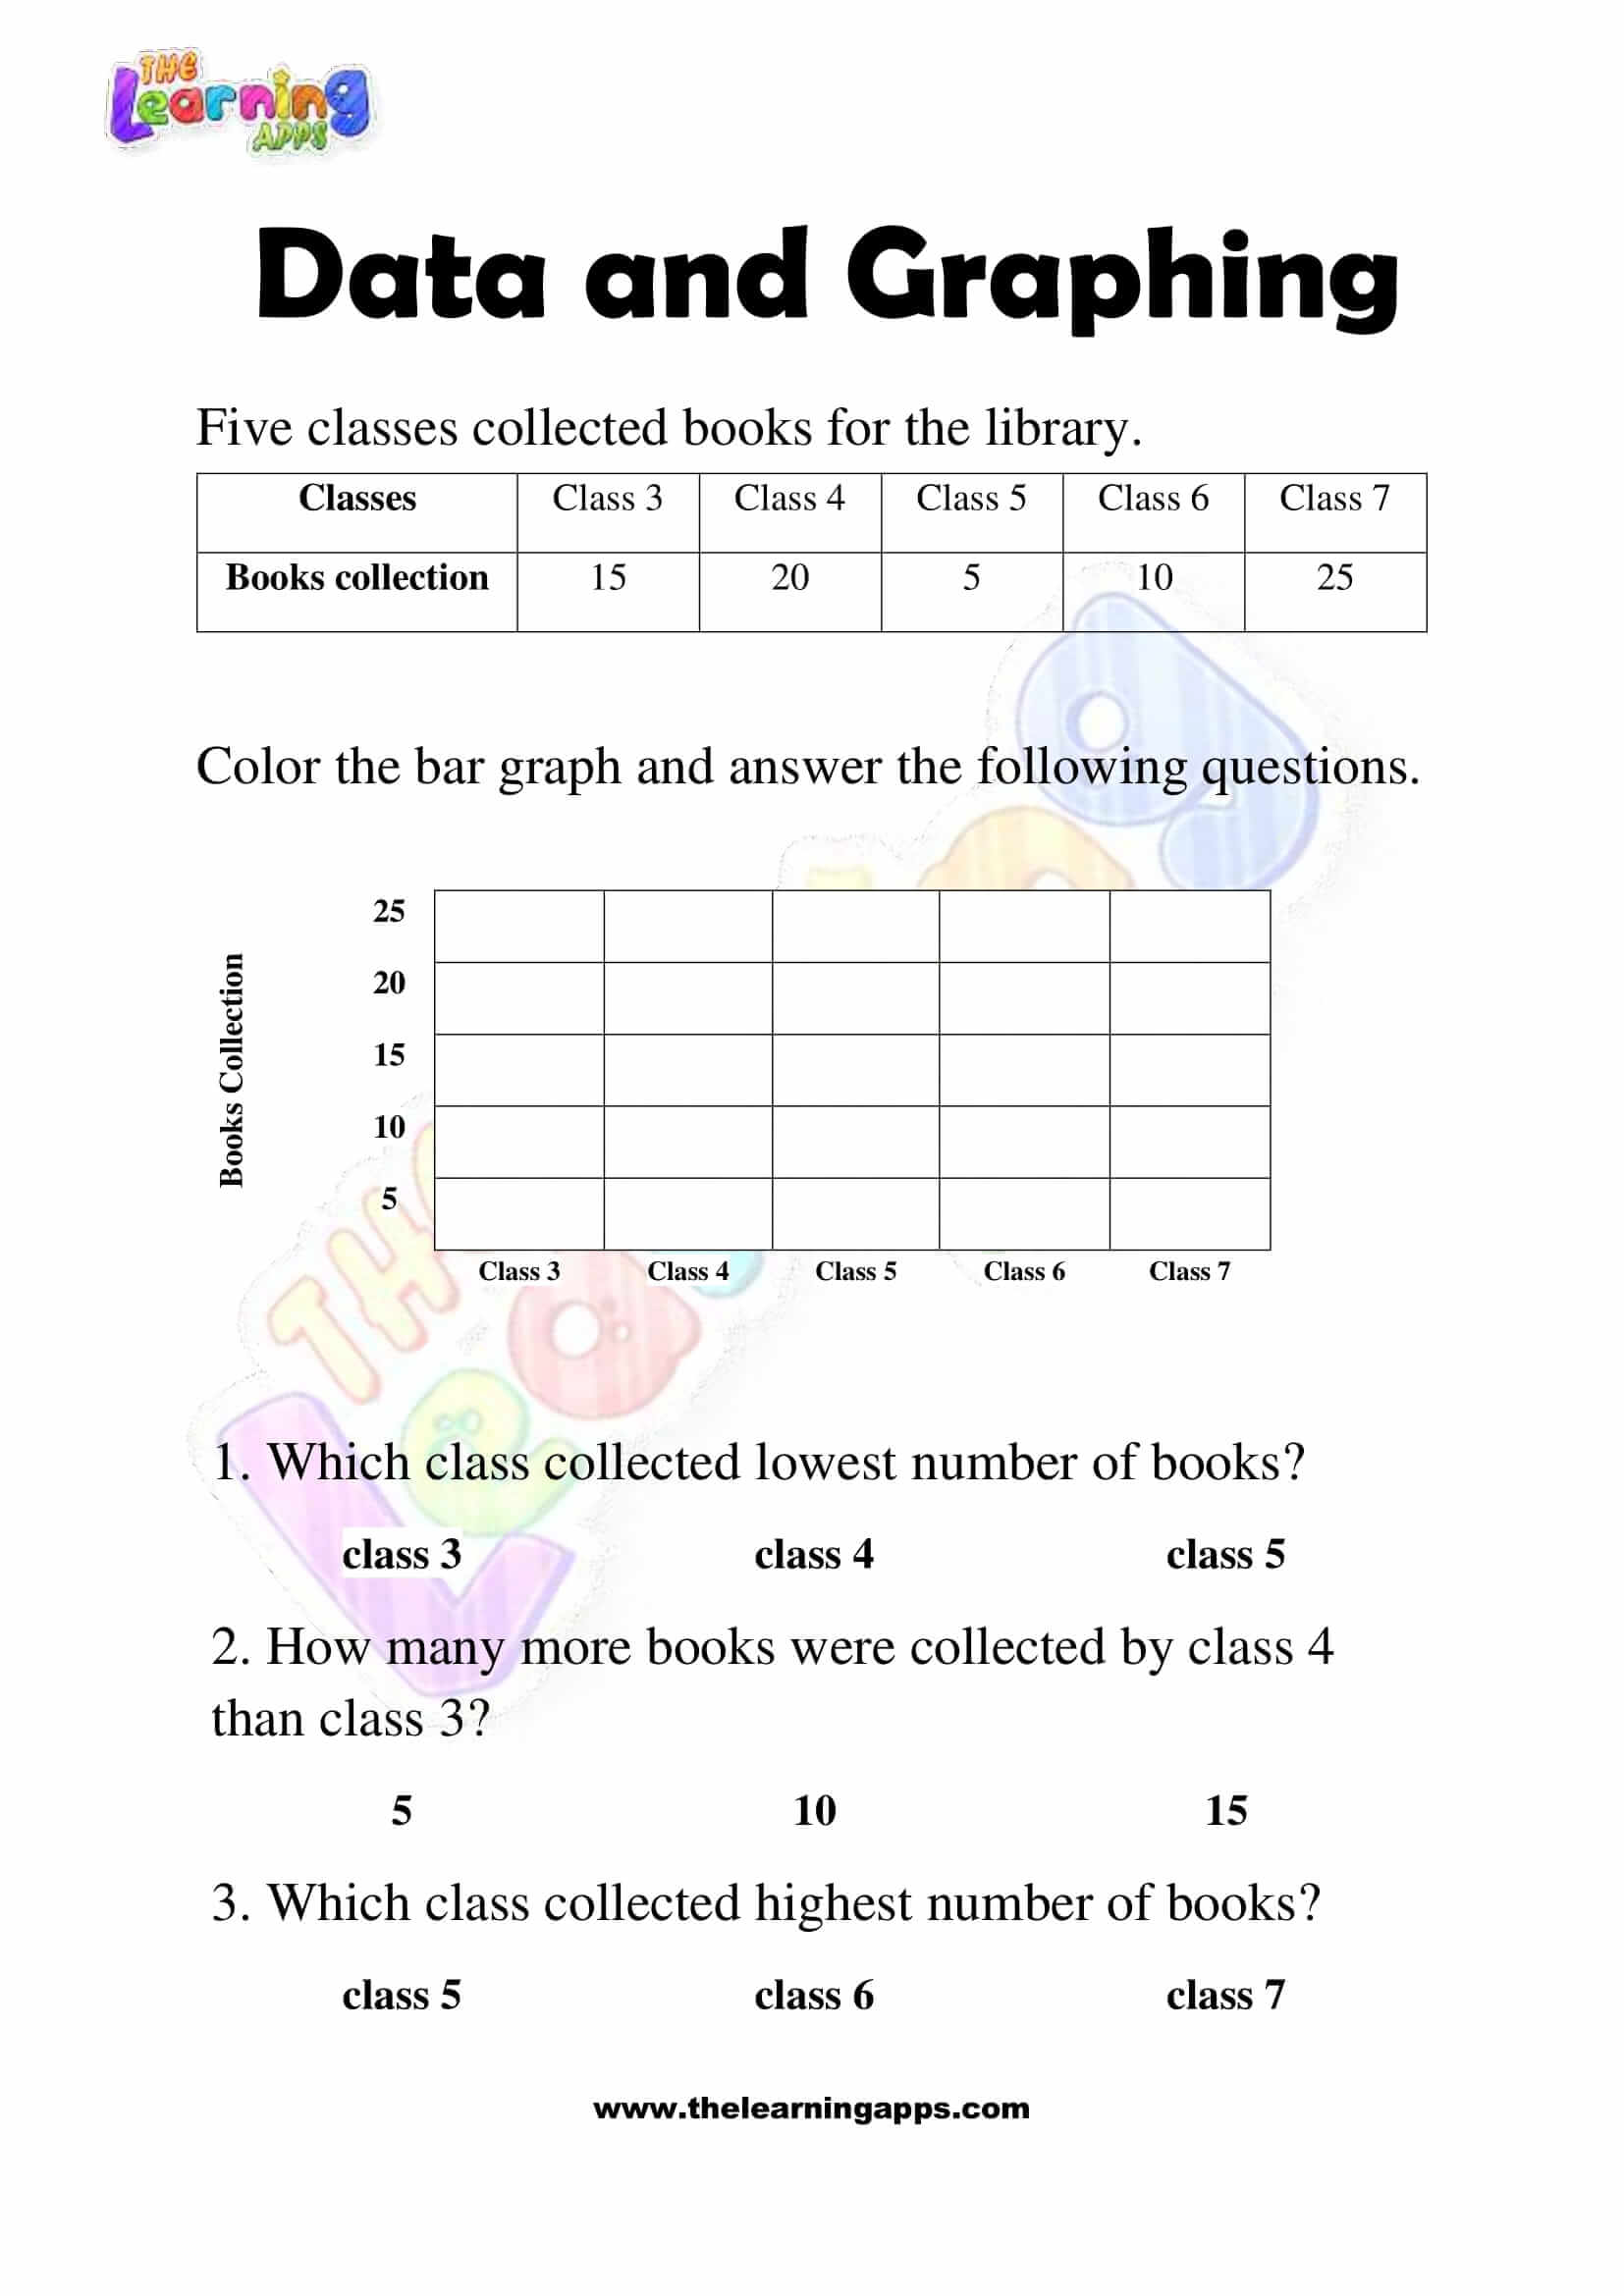 Data and Graphing - Grade 3 - Activity 6